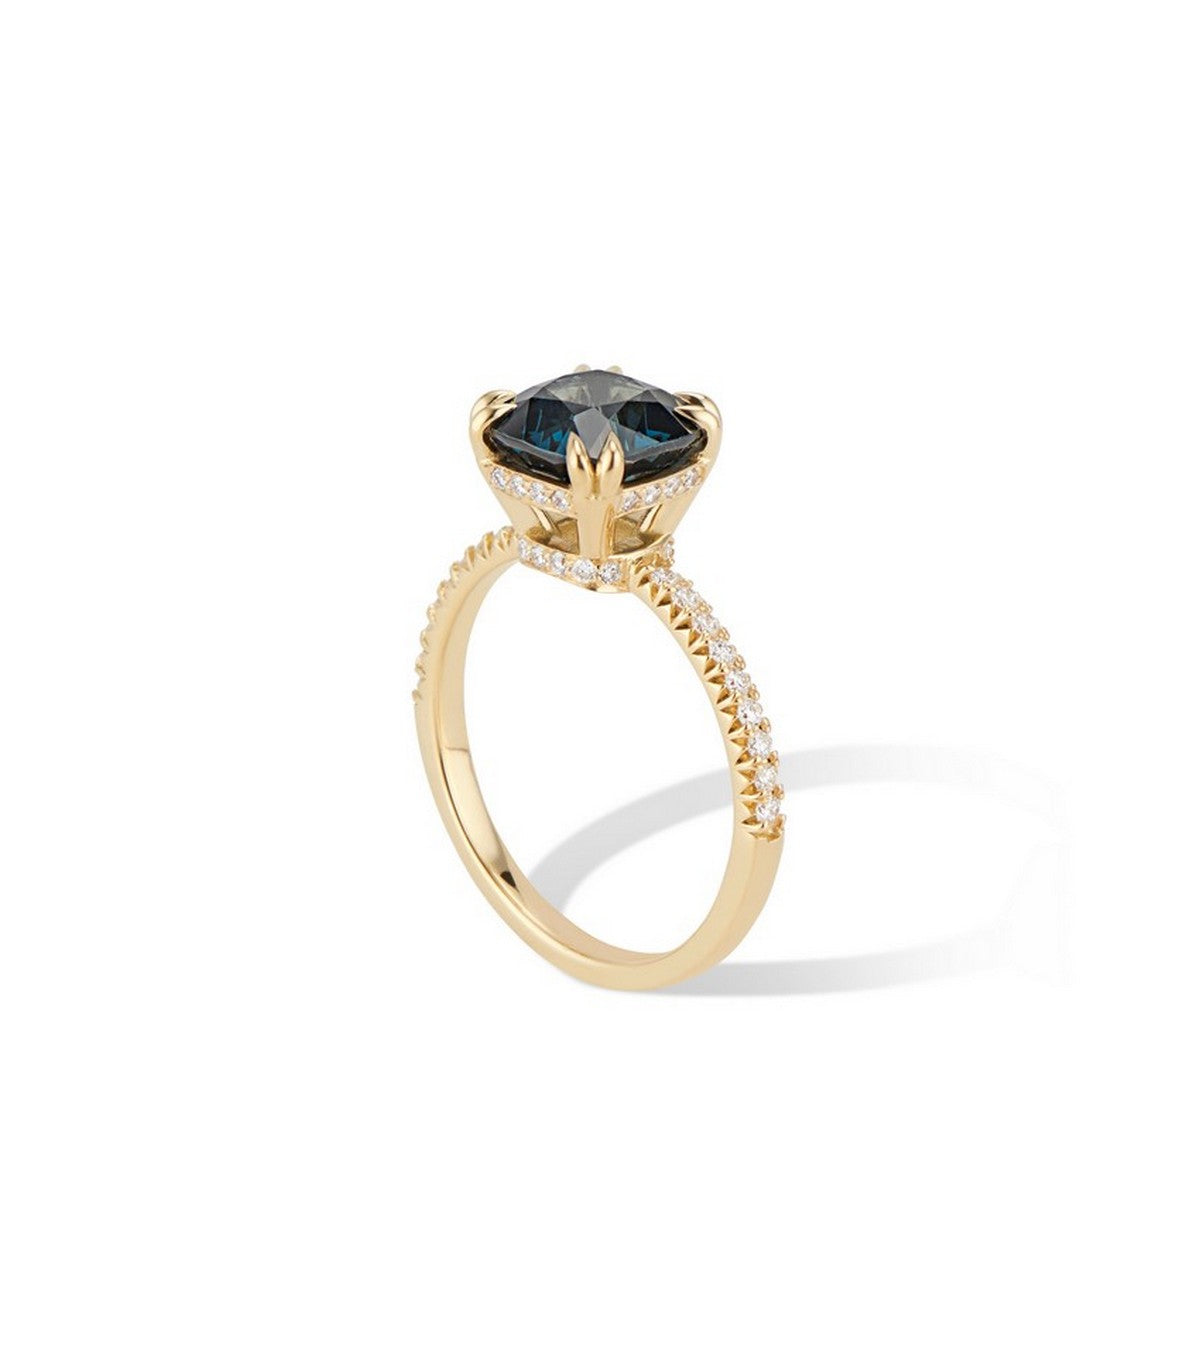 18K Yellow Gold Cushion Cut Peacock Blue Spinel Engagement Ring - Thomas Laine Jewelry